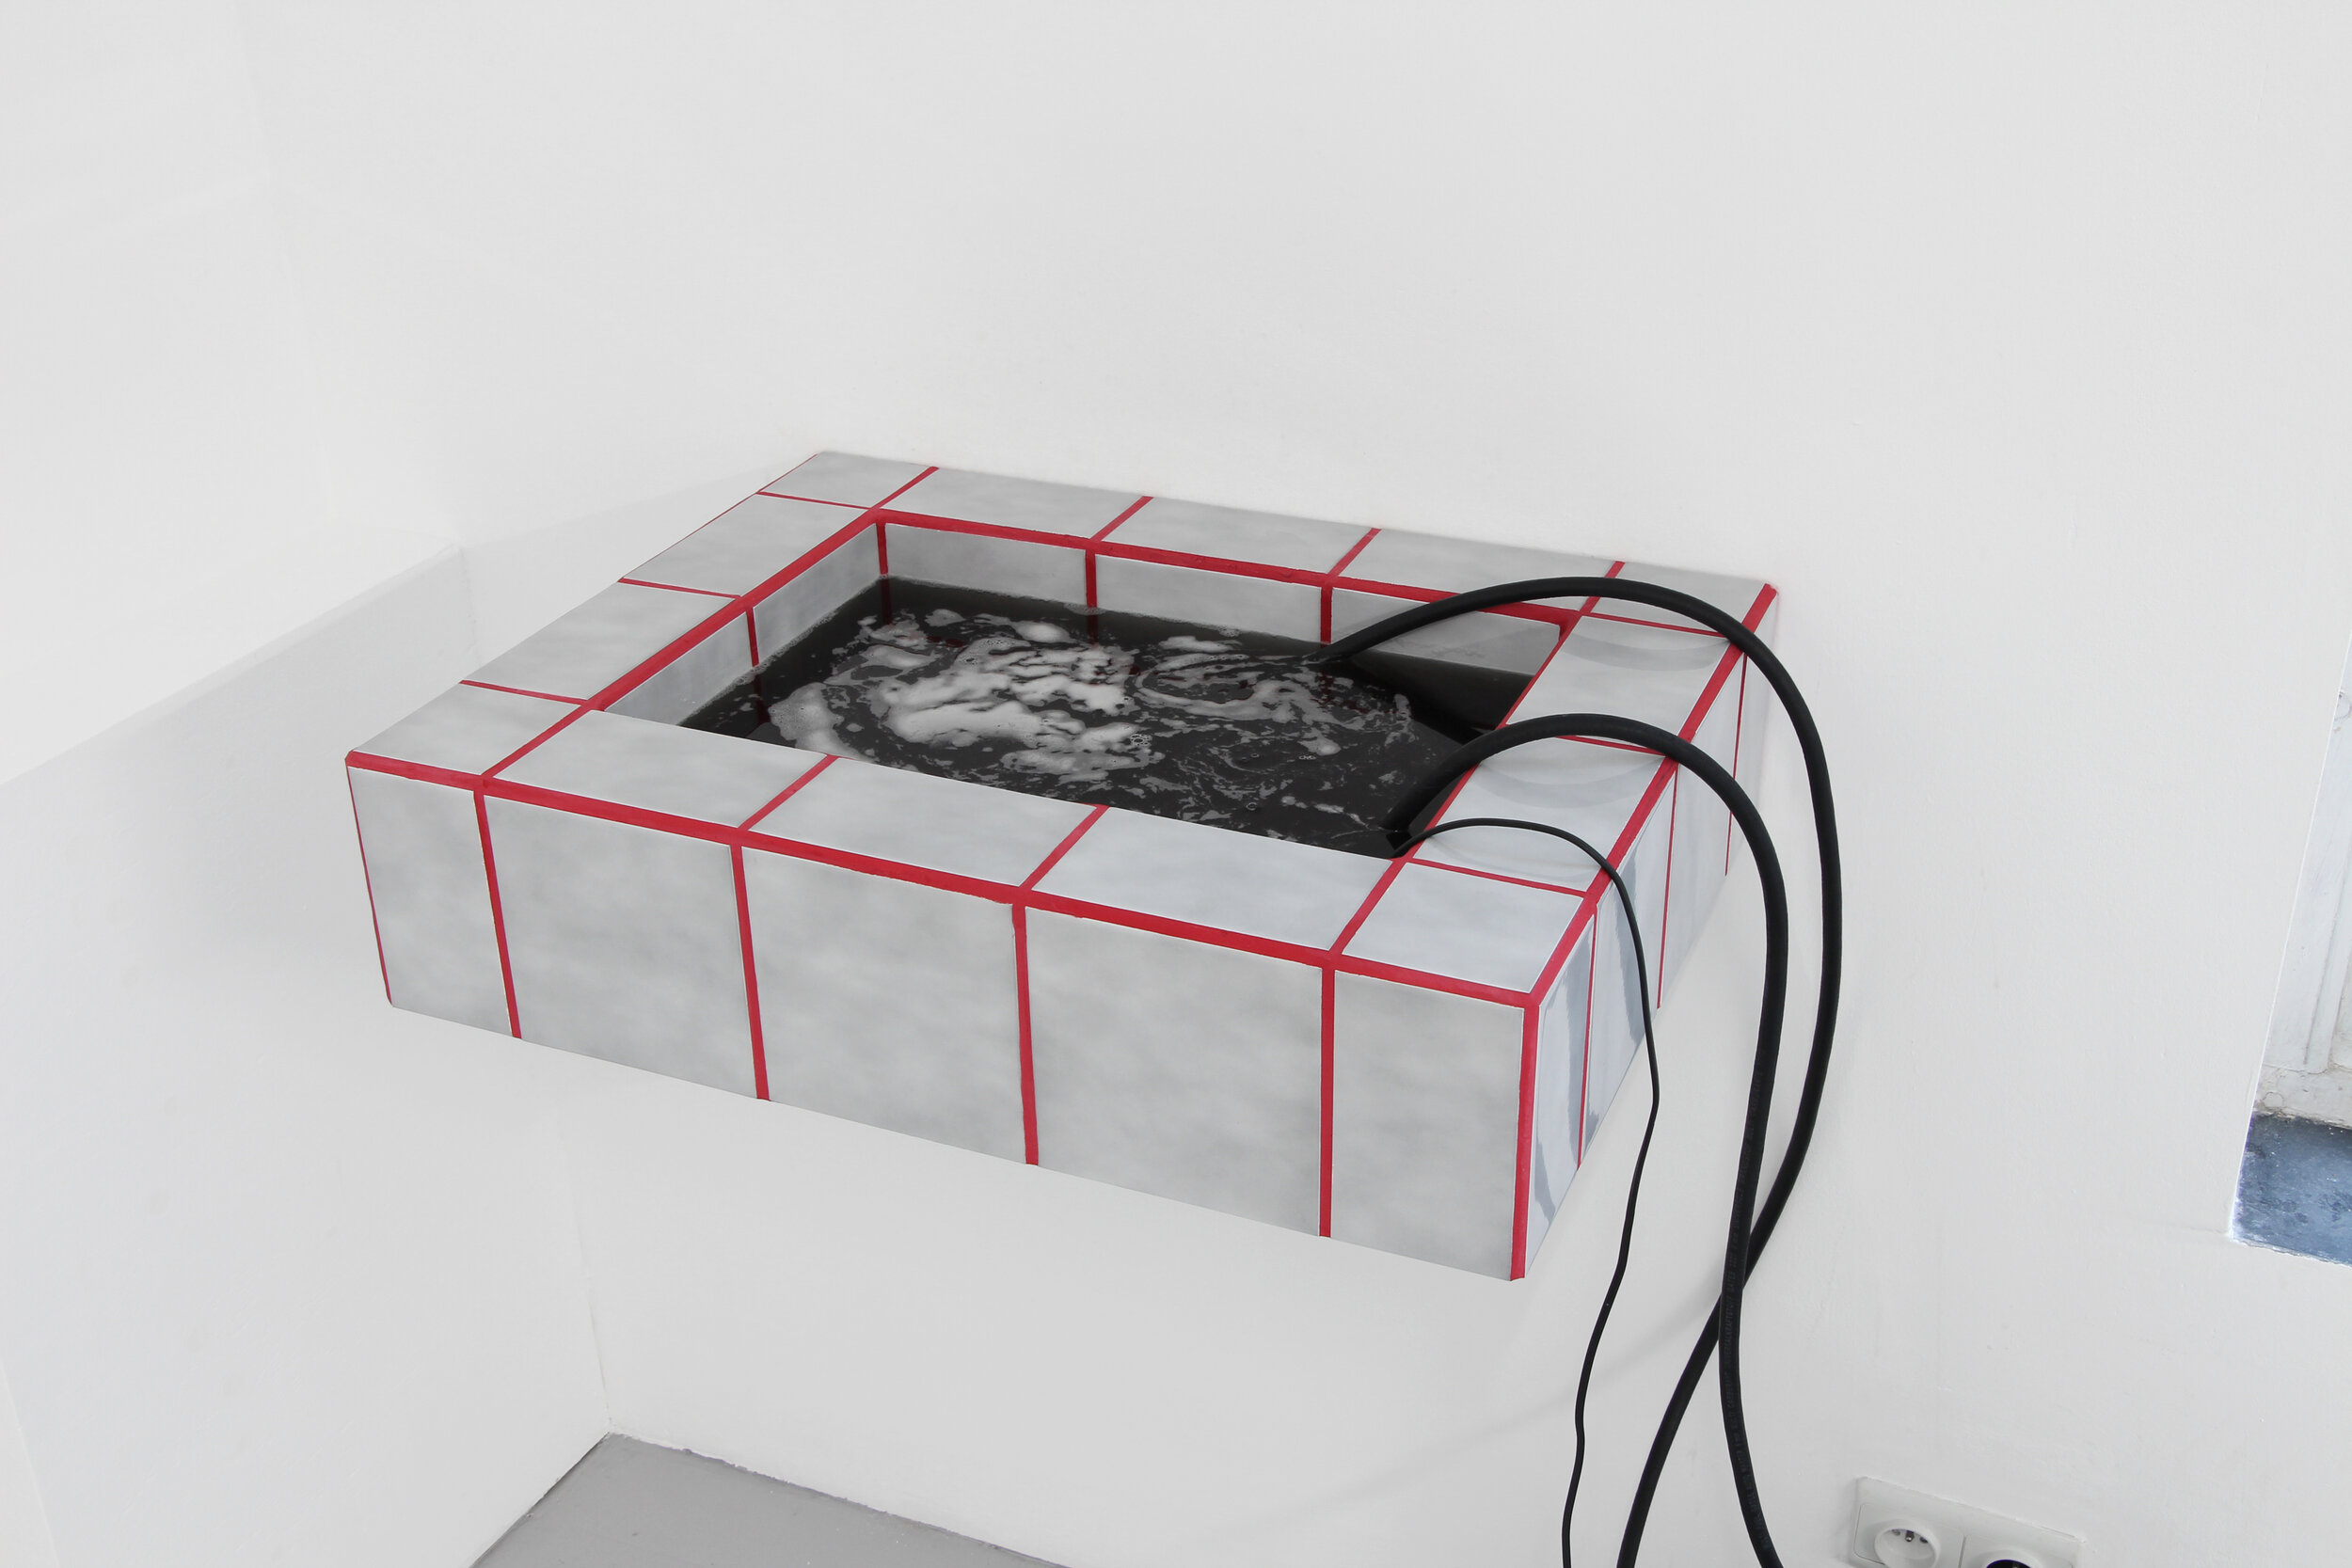   Agua de frijoles  (Detail), bean infused water, tile fountain, pumps and cables, plactic bucket, size variable, Canopy Gallery, Brussels, 2016 